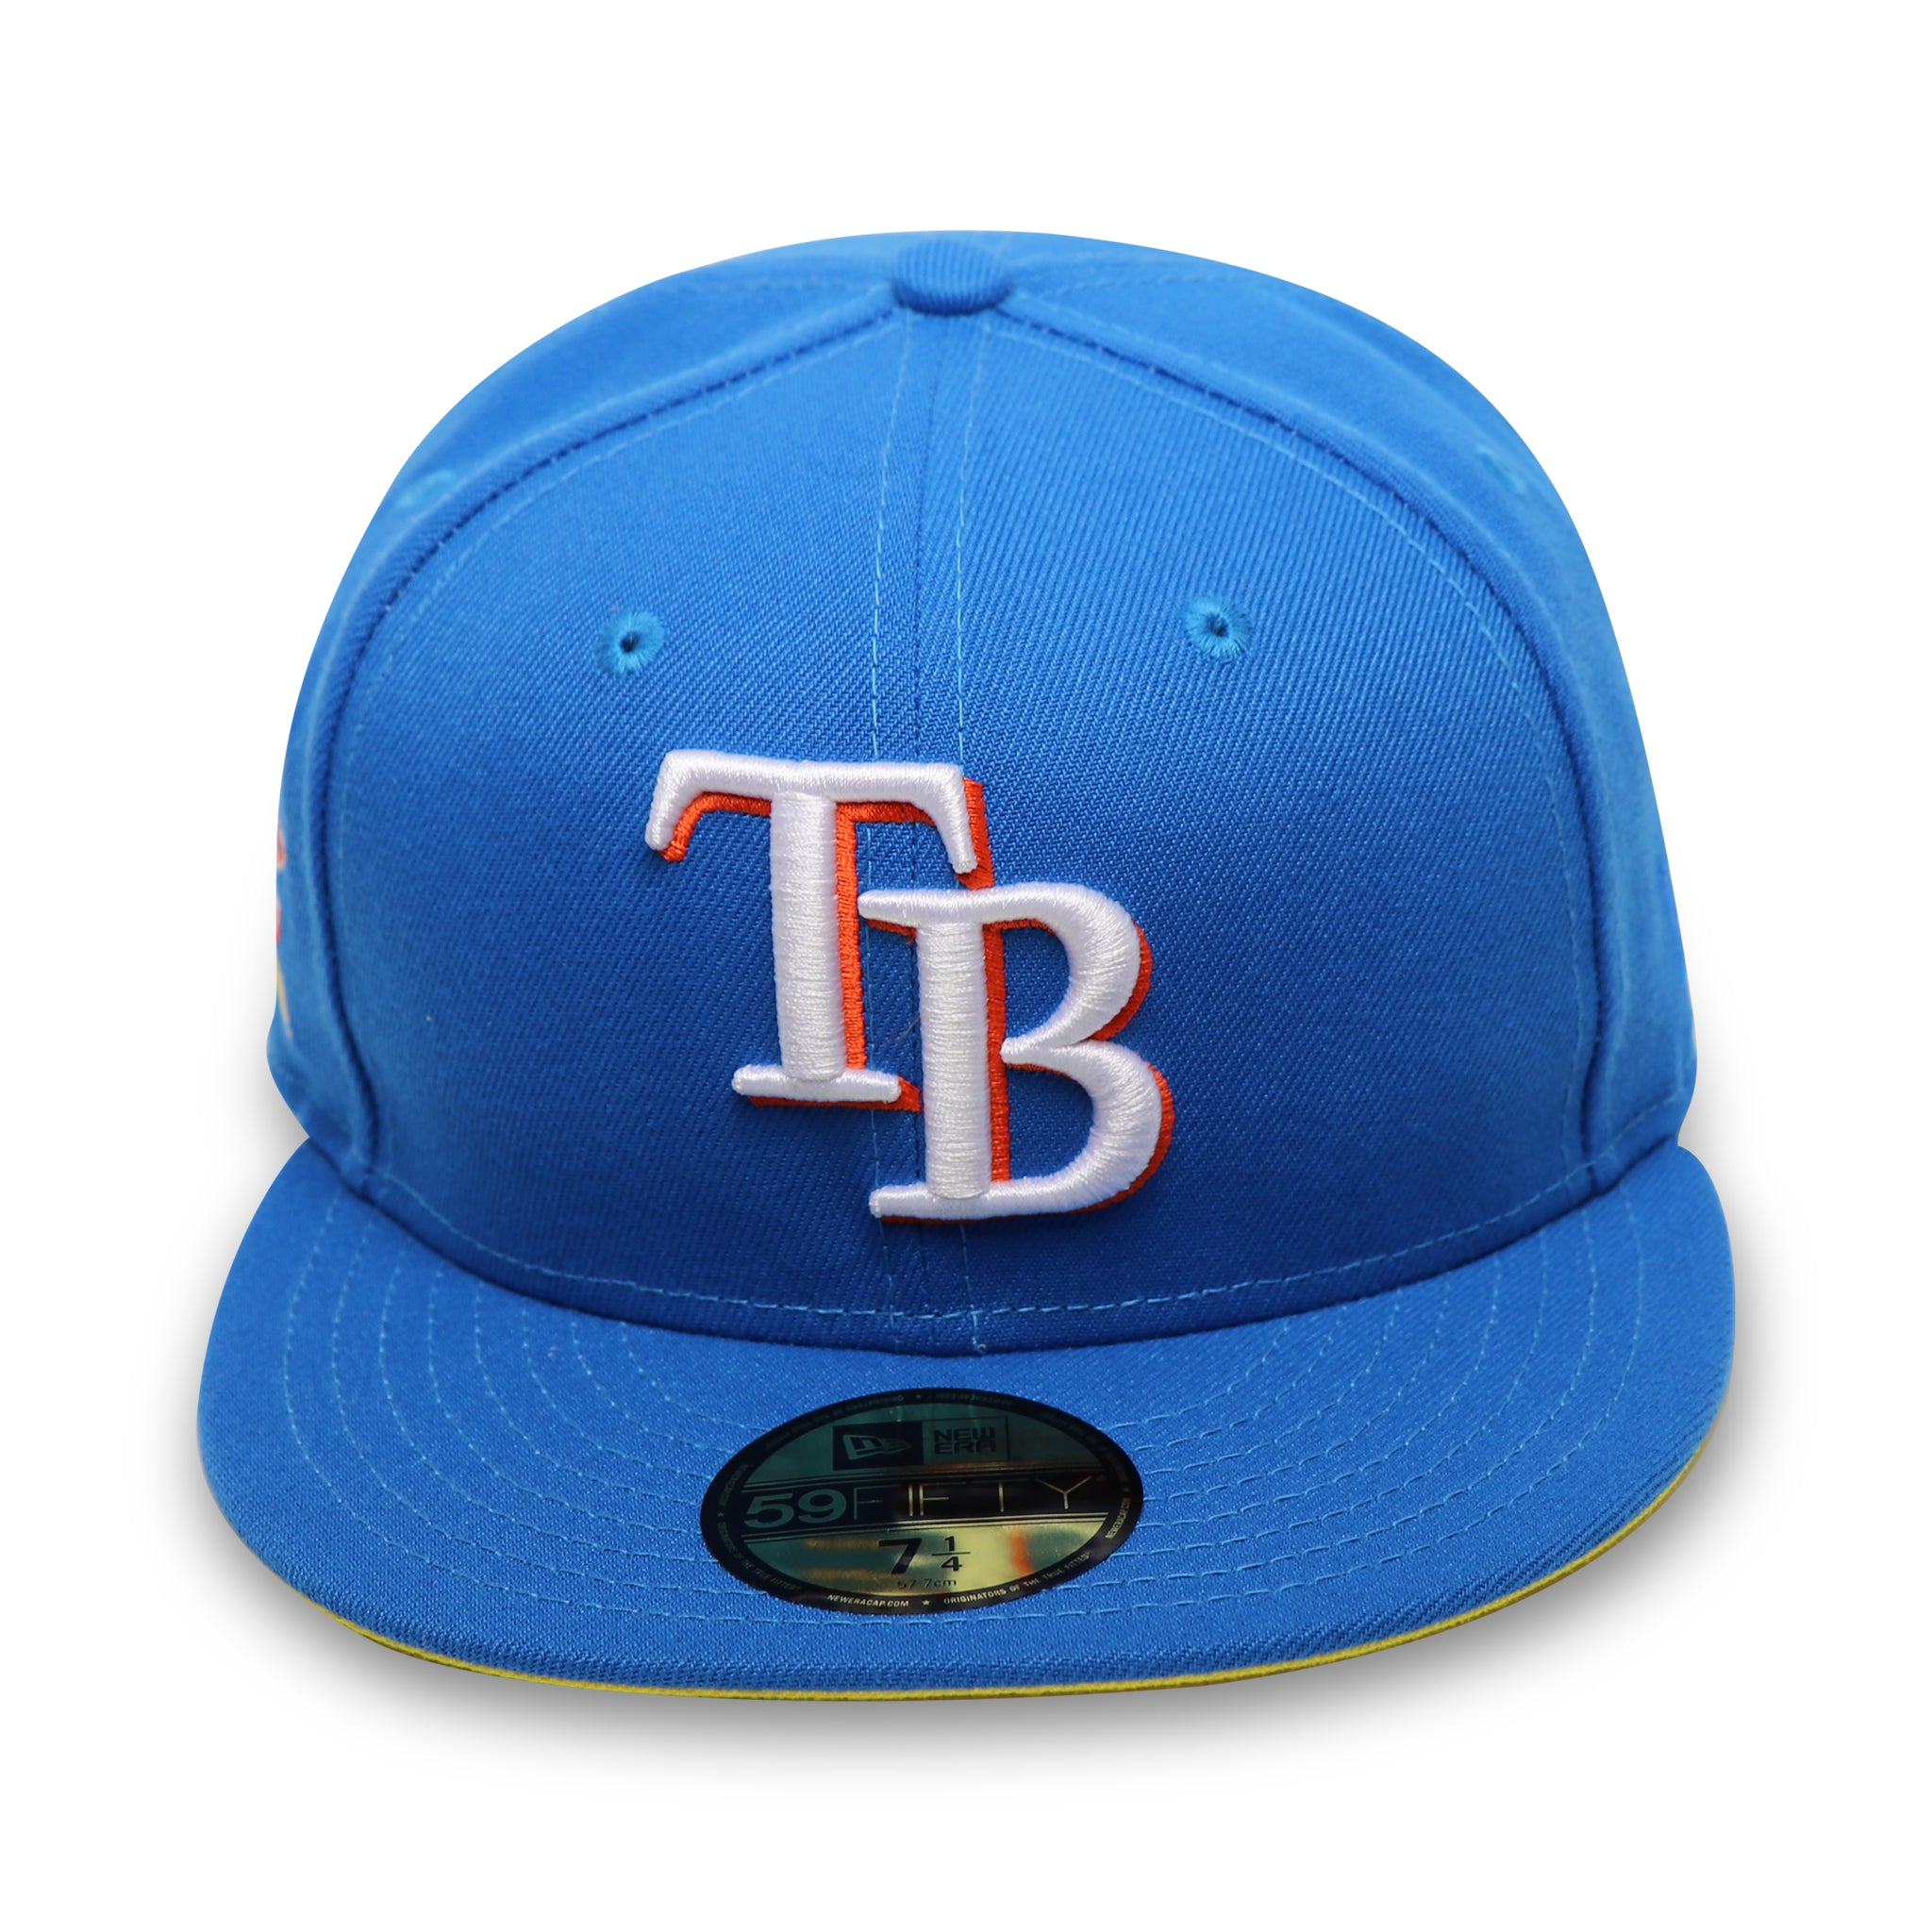 TAMPA BAY DEVILRAYS "2017 ASG "REVERSE RIVALRY) NEW ERA 59FIFTY FITTED (YELLOW BOTTOM)